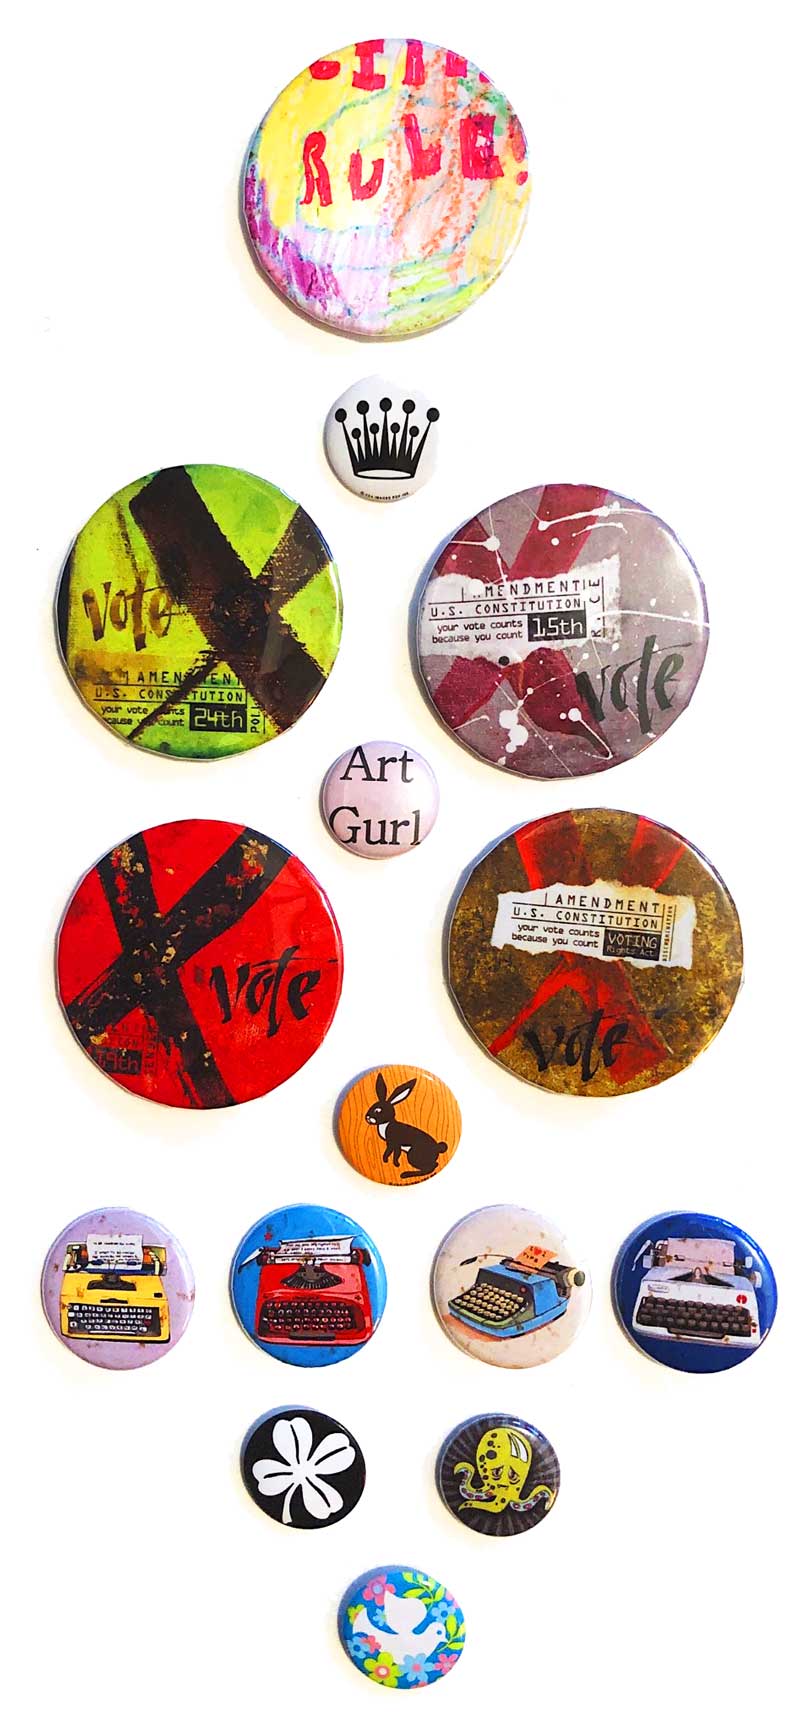 A collection of button pins